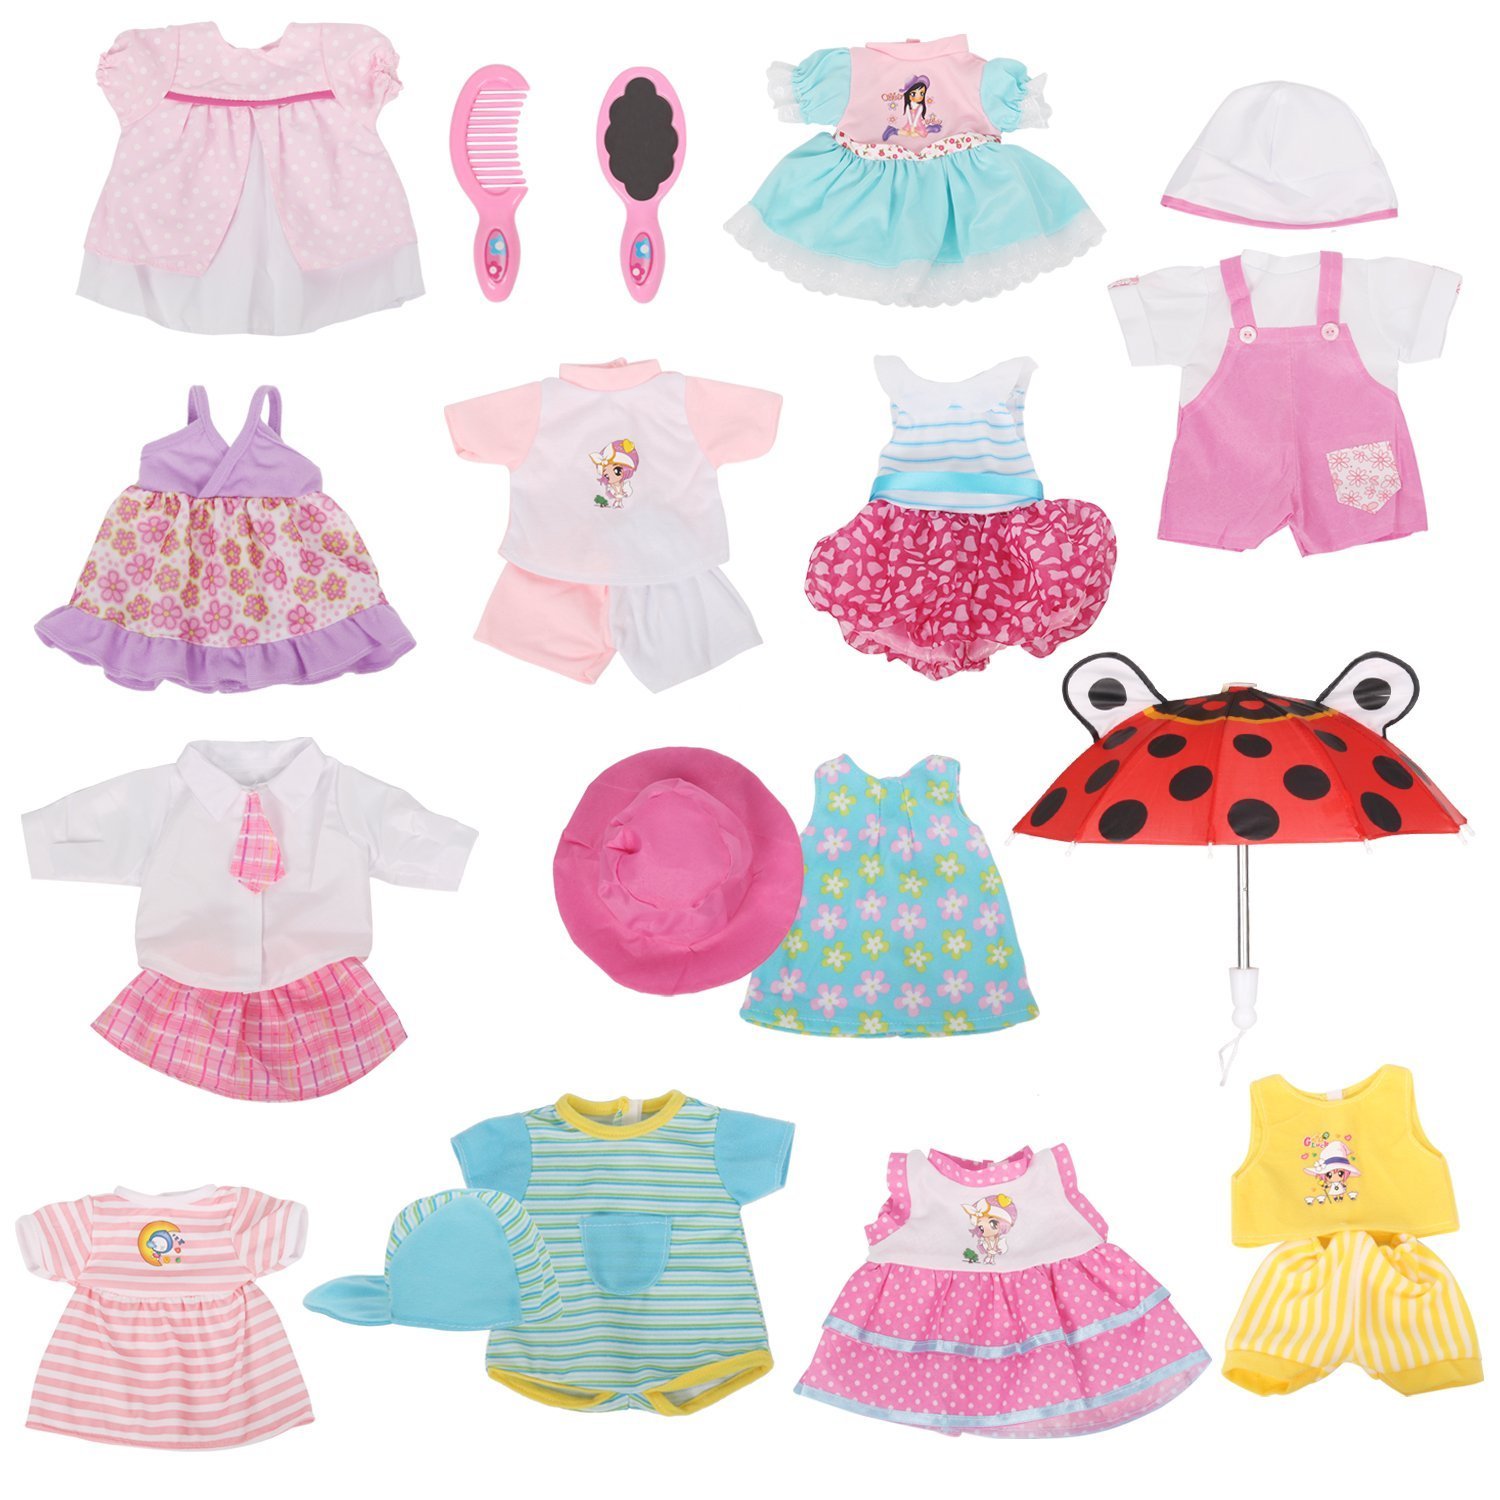 16 baby doll clothes